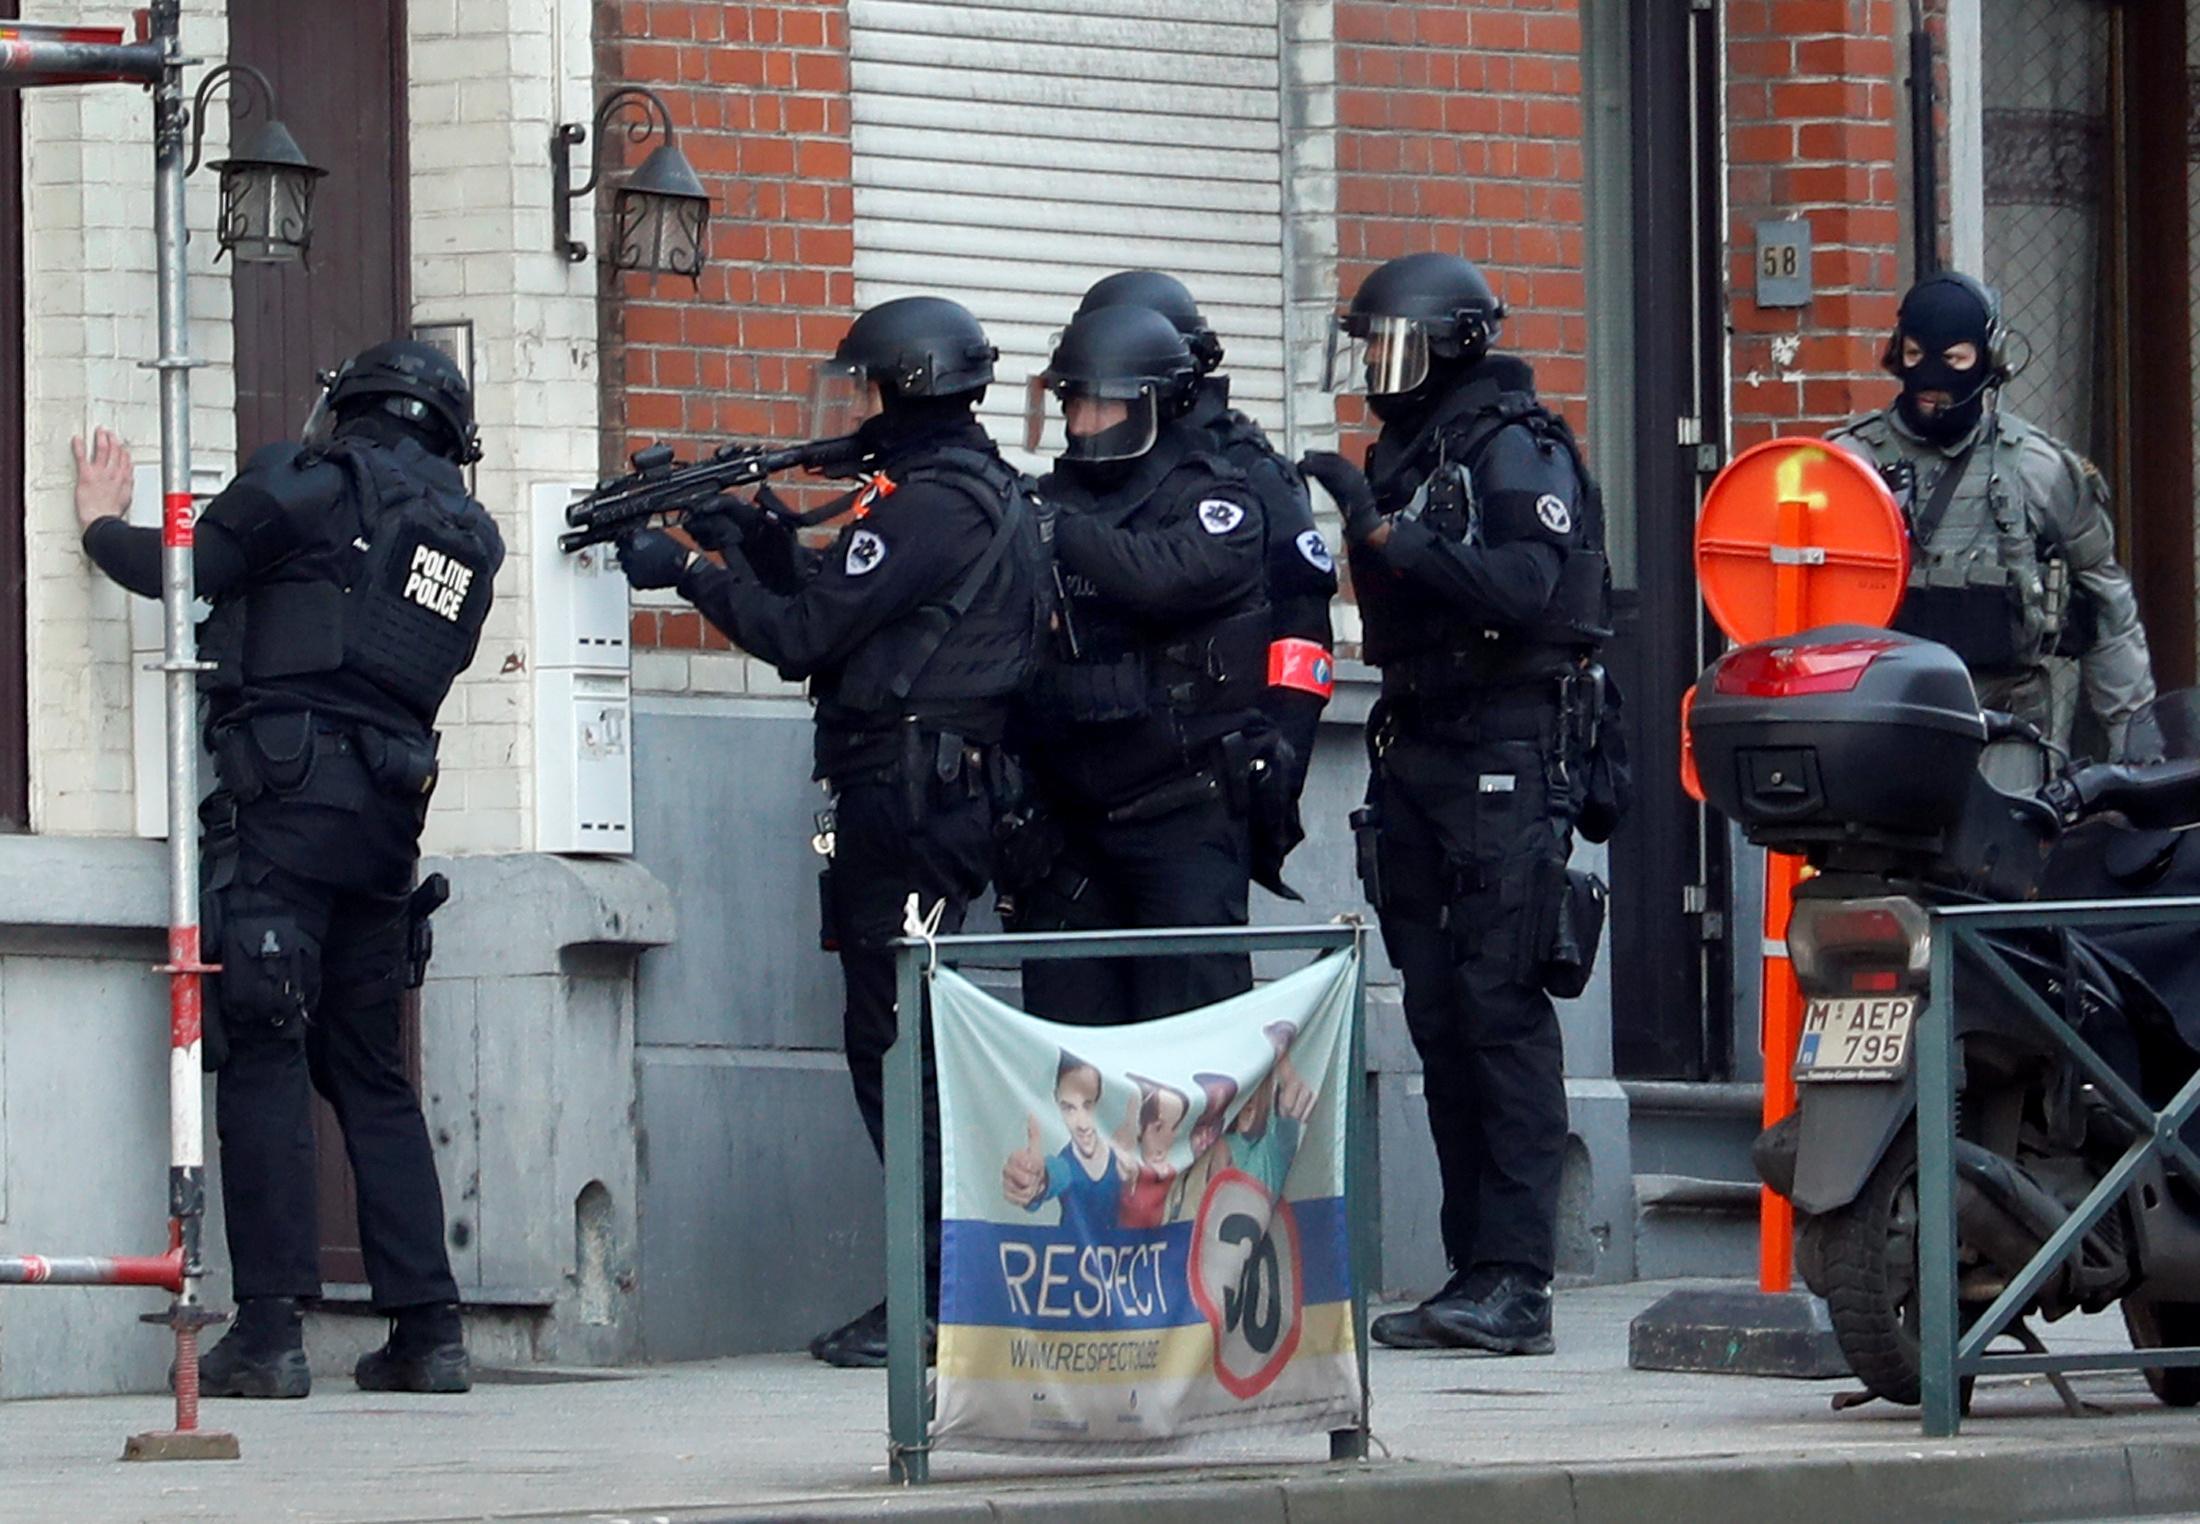 Belgian police special forces prepare to enter a building after an area of the Forest commune was put on lockdown